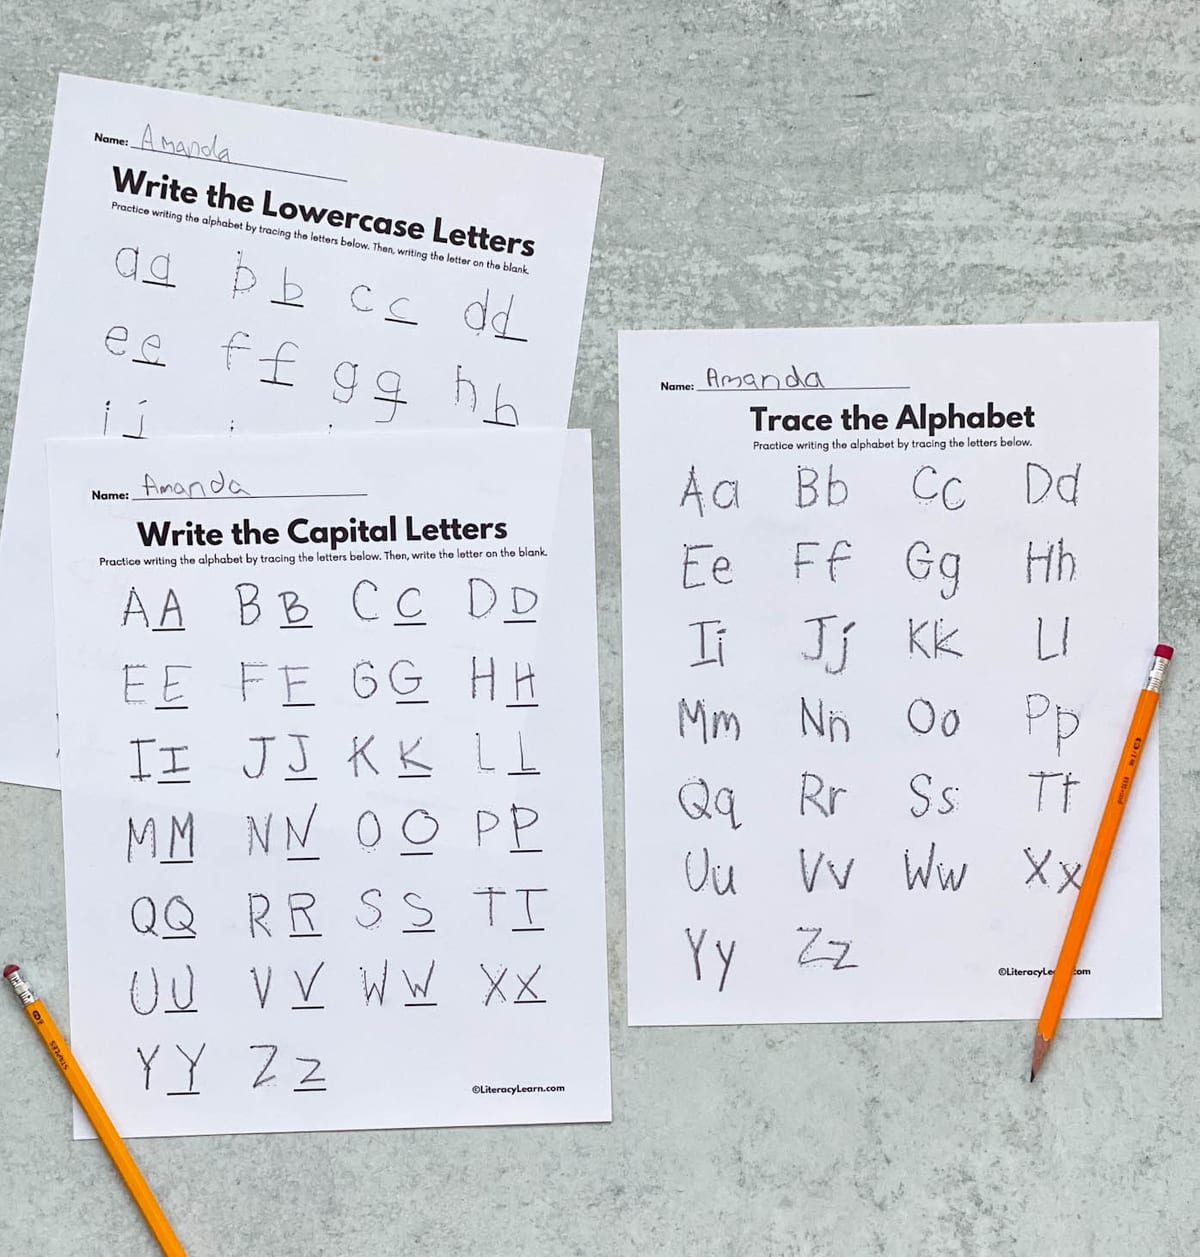 Three completed letter tracing worksheets with a pencil.